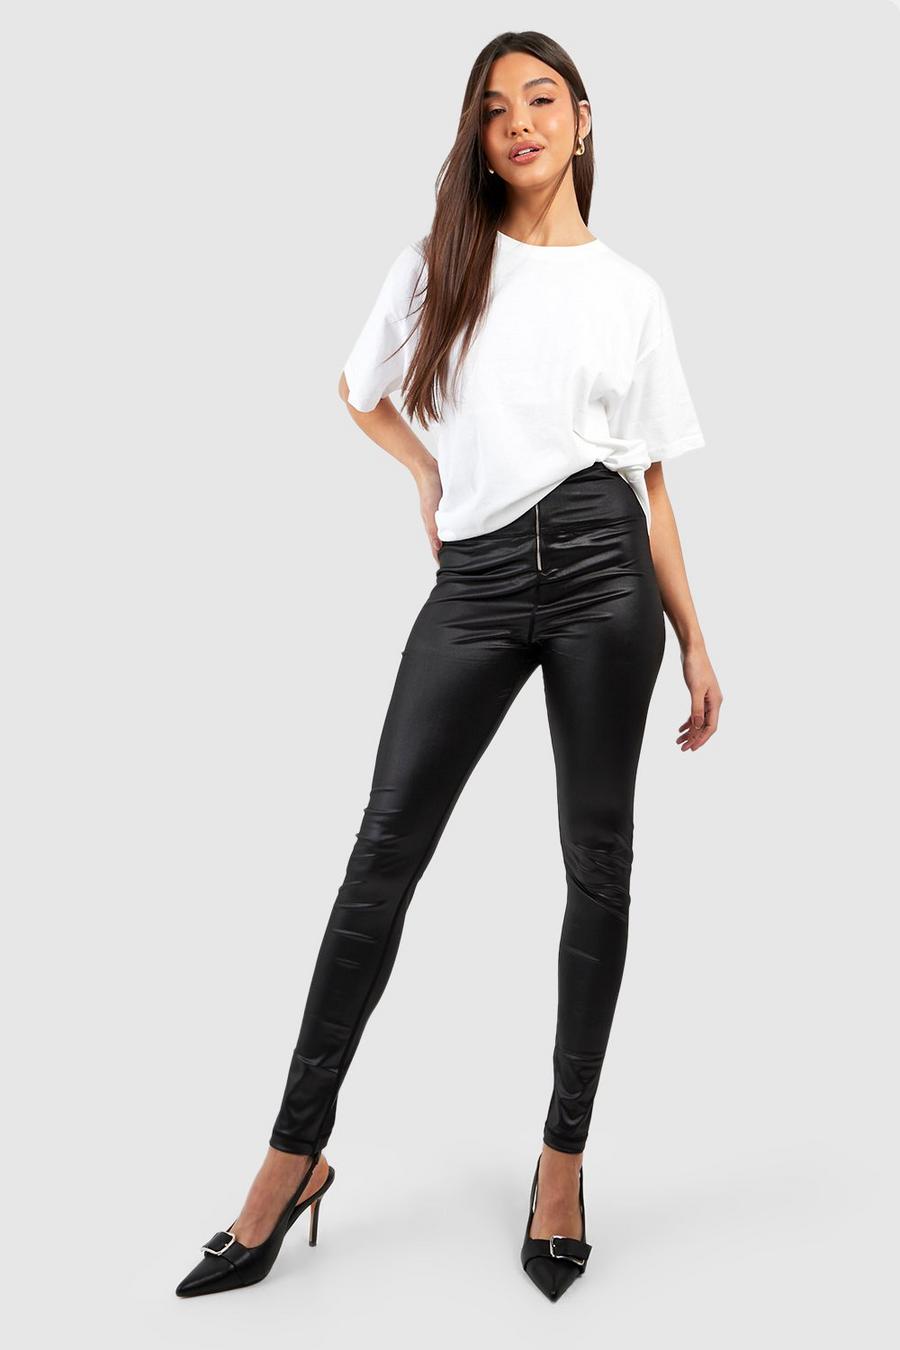 Black Zip Front Shiny High Waisted Leggings image number 1